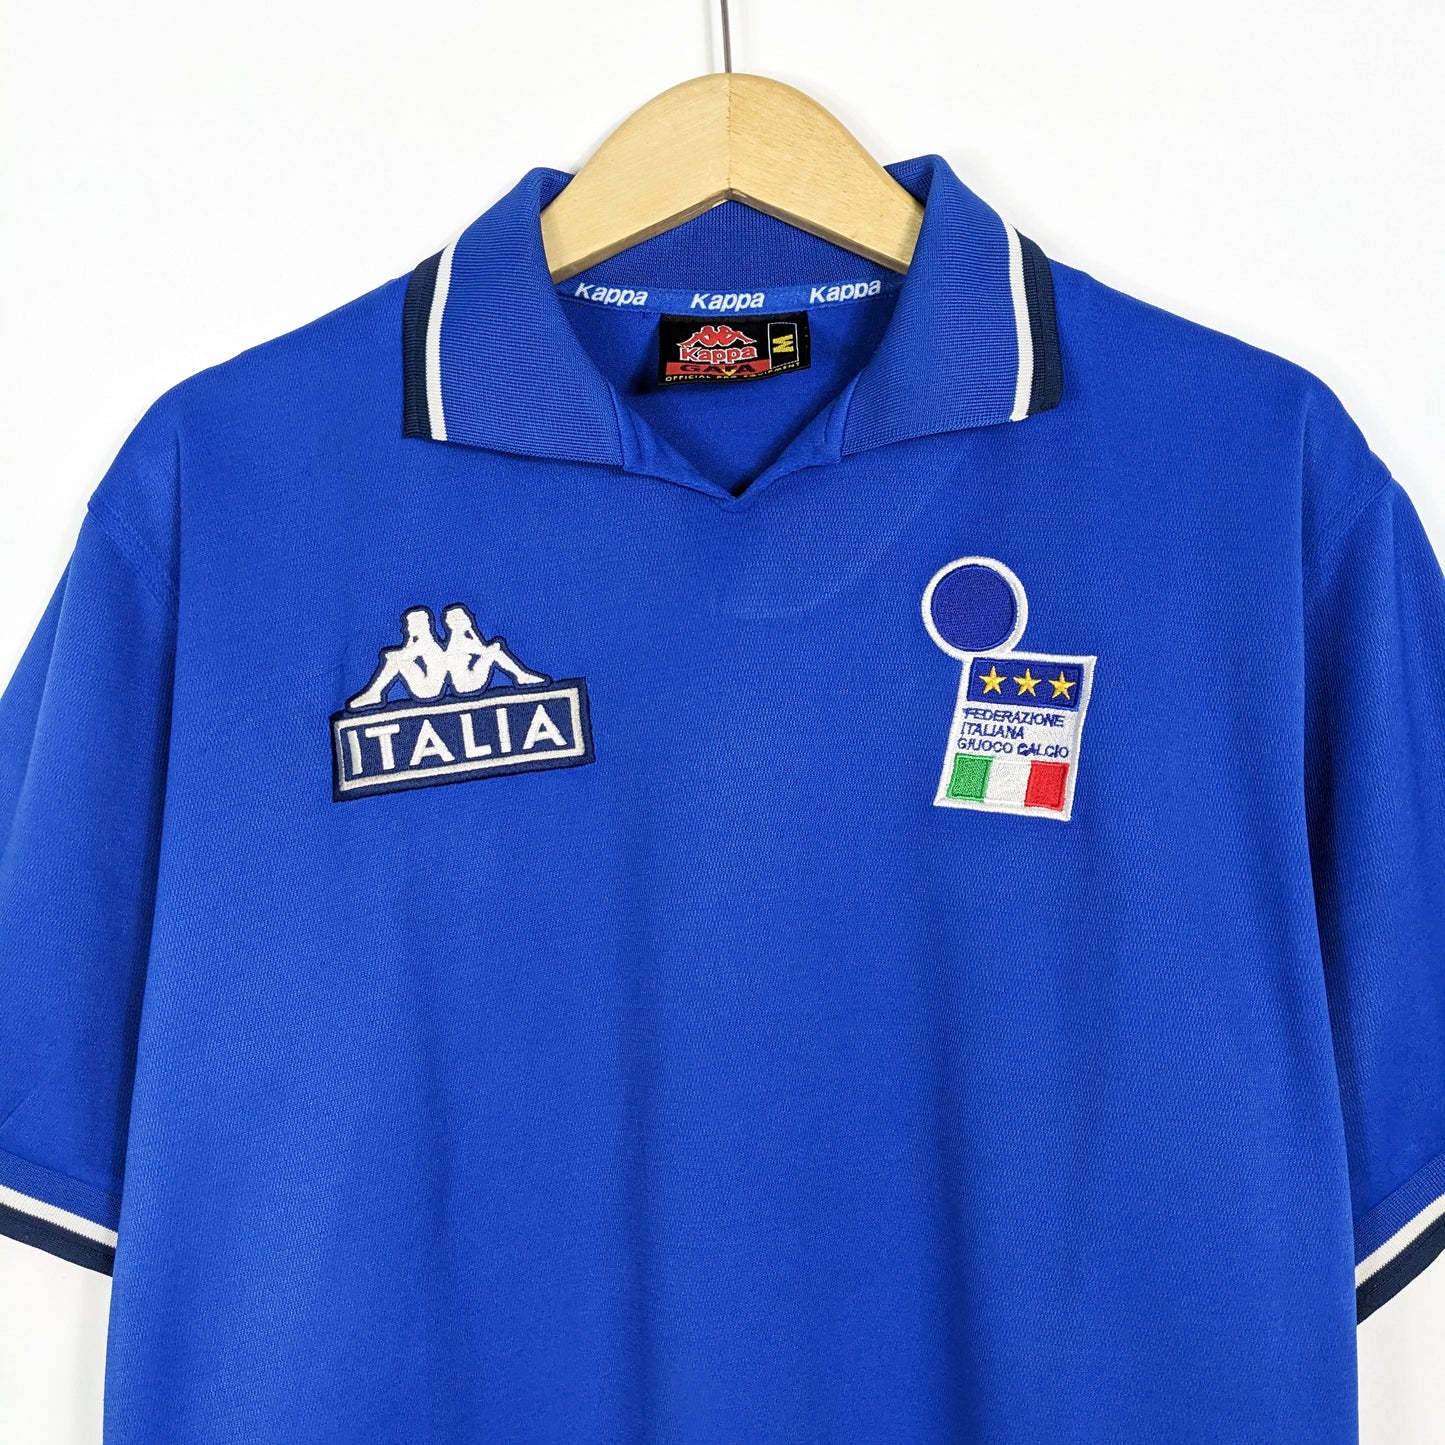 Authentic Italy Kappa Polo Shirt - Size M